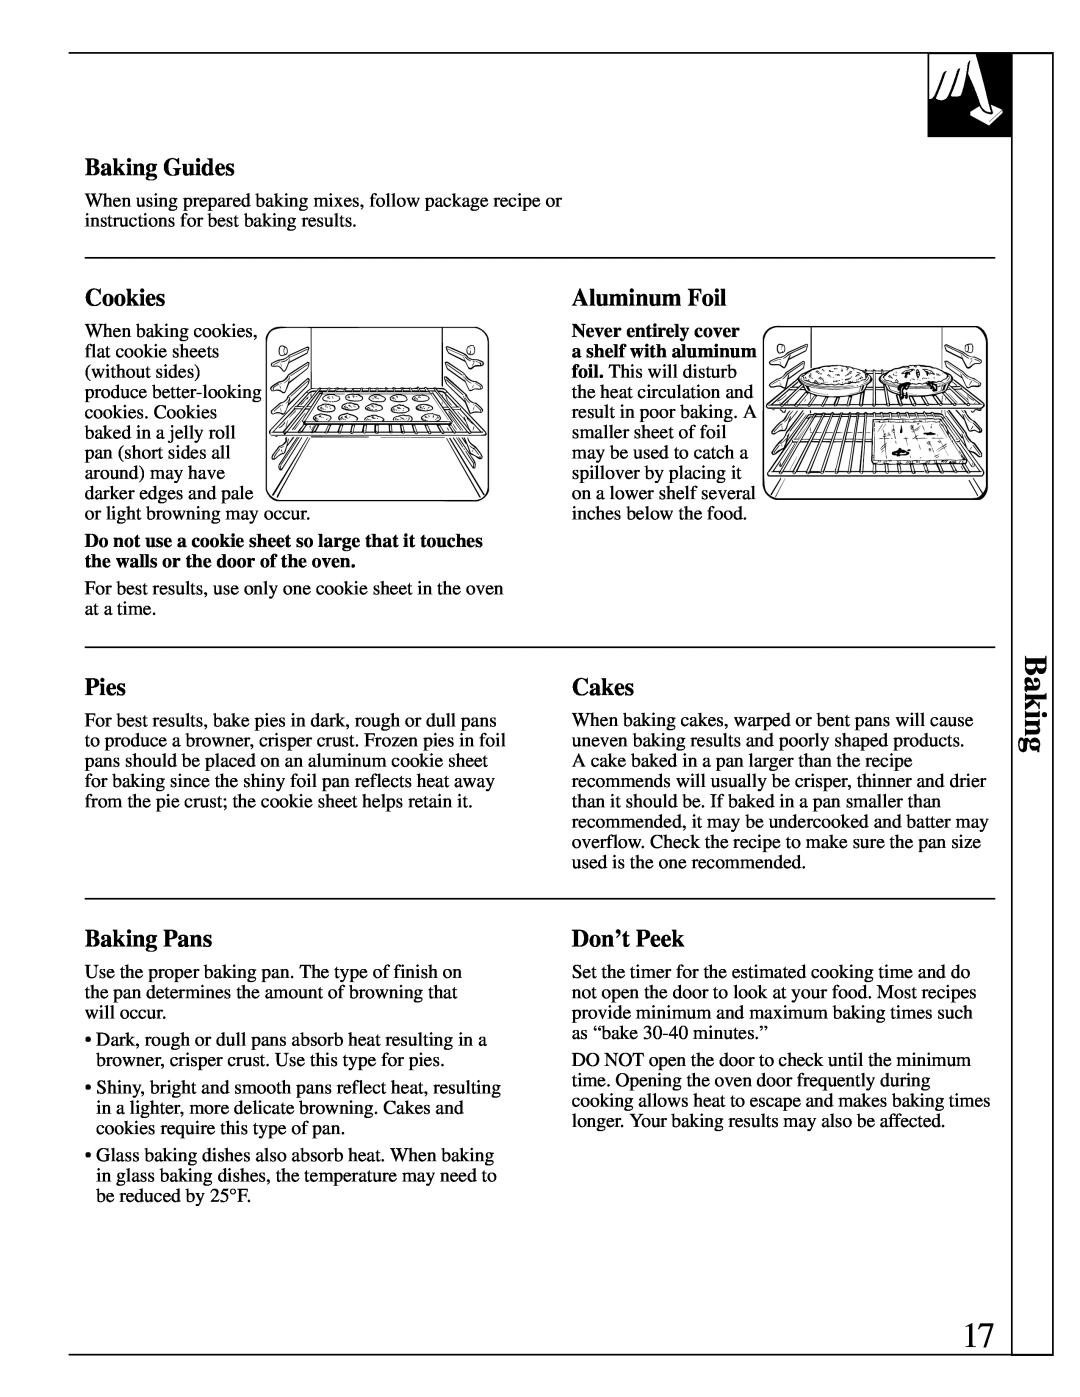 Hotpoint RGB744 installation instructions Baking Guides, Cookies, Aluminum Foil, Pies, Cakes, Baking Pans, Don’t Peek 